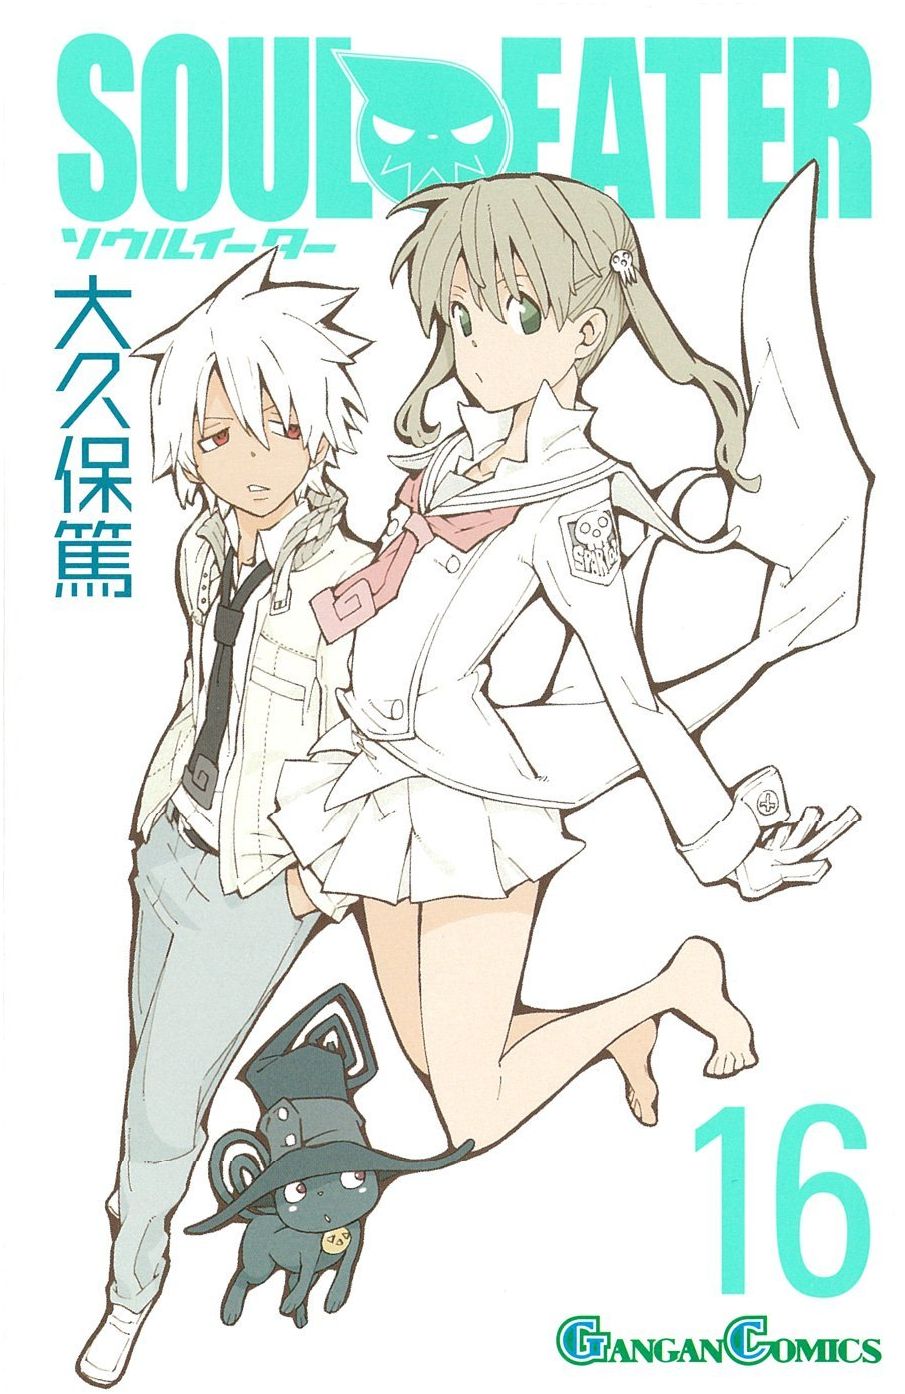 http://images1.wikia.nocookie.net/__cb20130318213441/souleater/fr/images/2/23/Soul_Eater_16.jpg